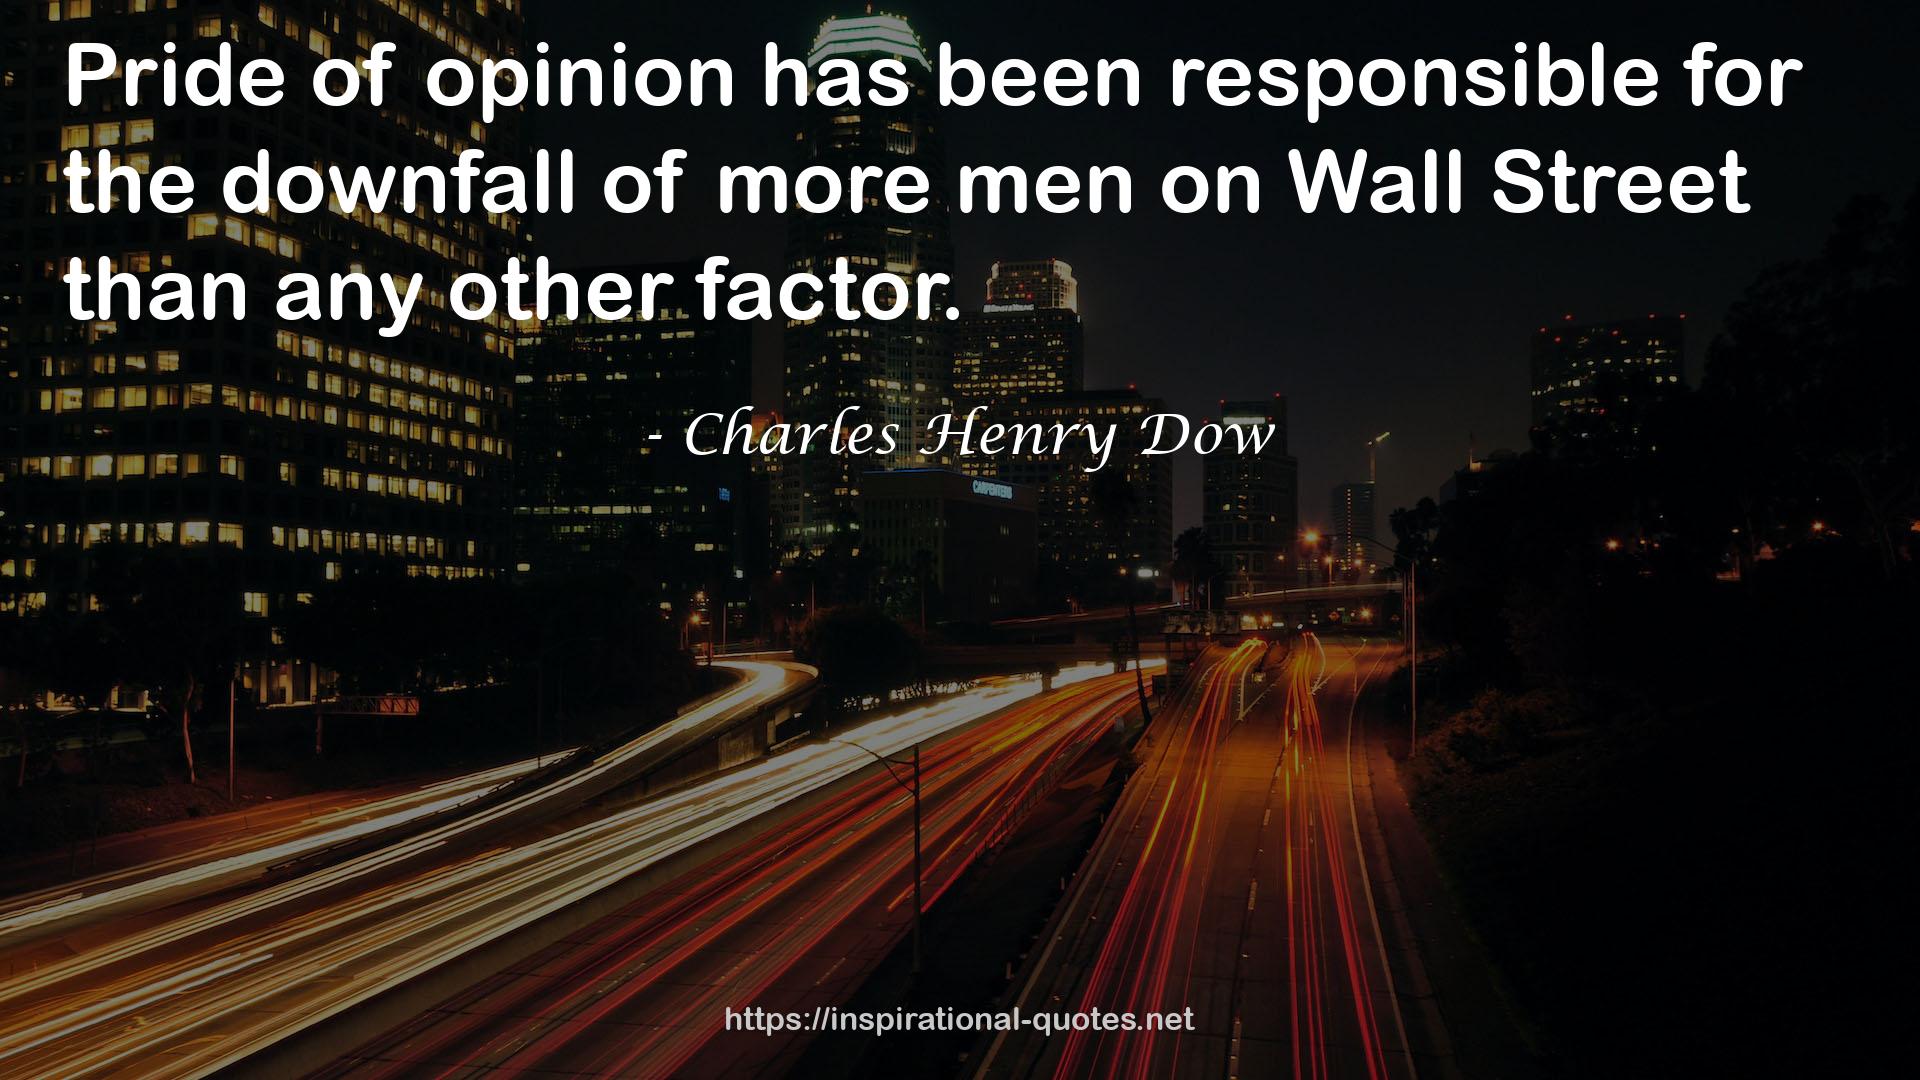 Charles Henry Dow QUOTES